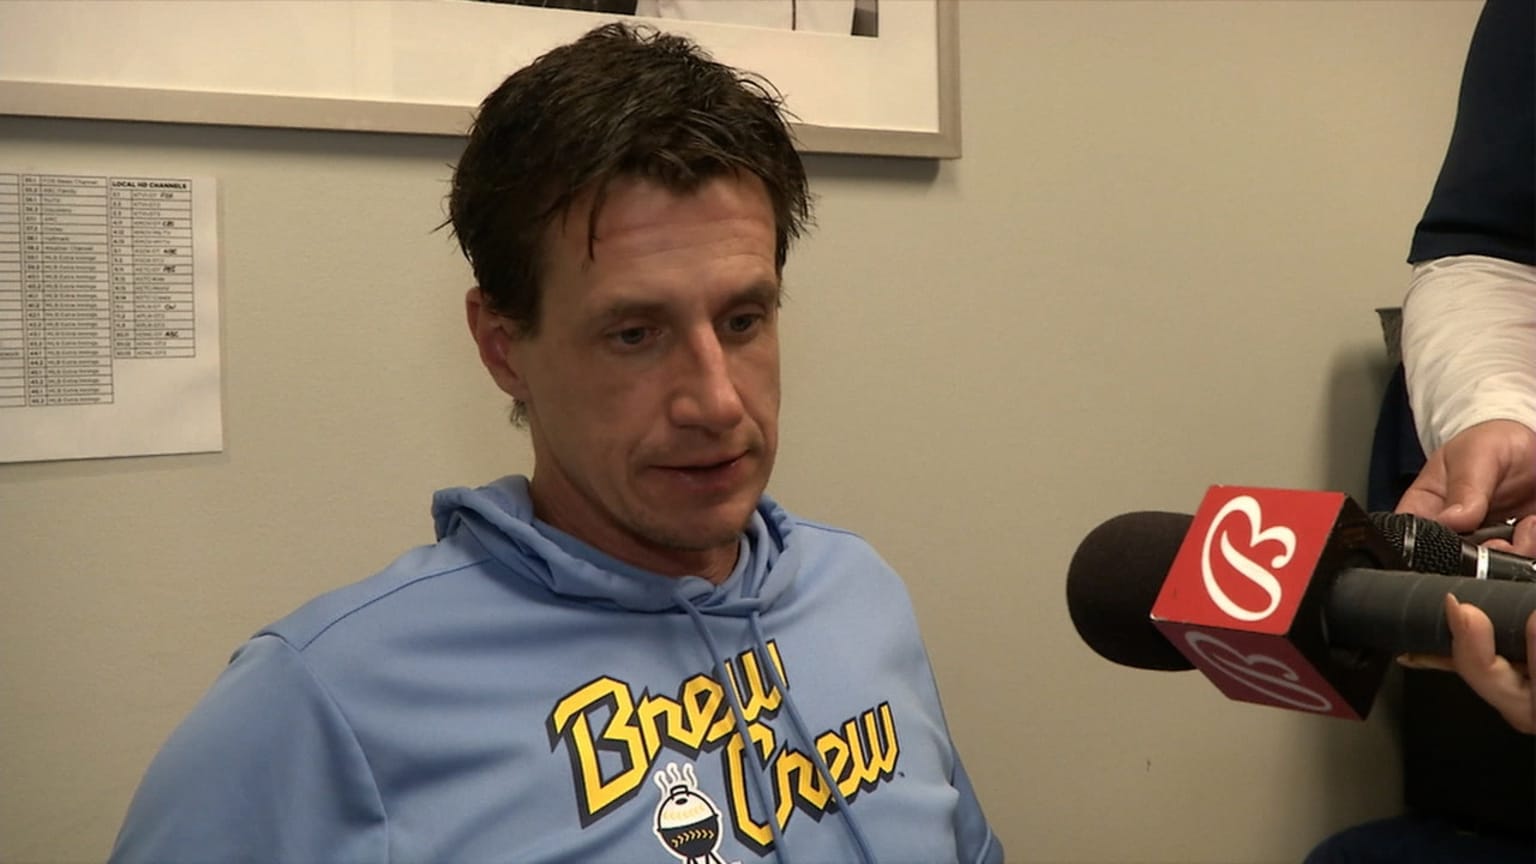 Craig Counsell on Brewers loss, 06/24/2022